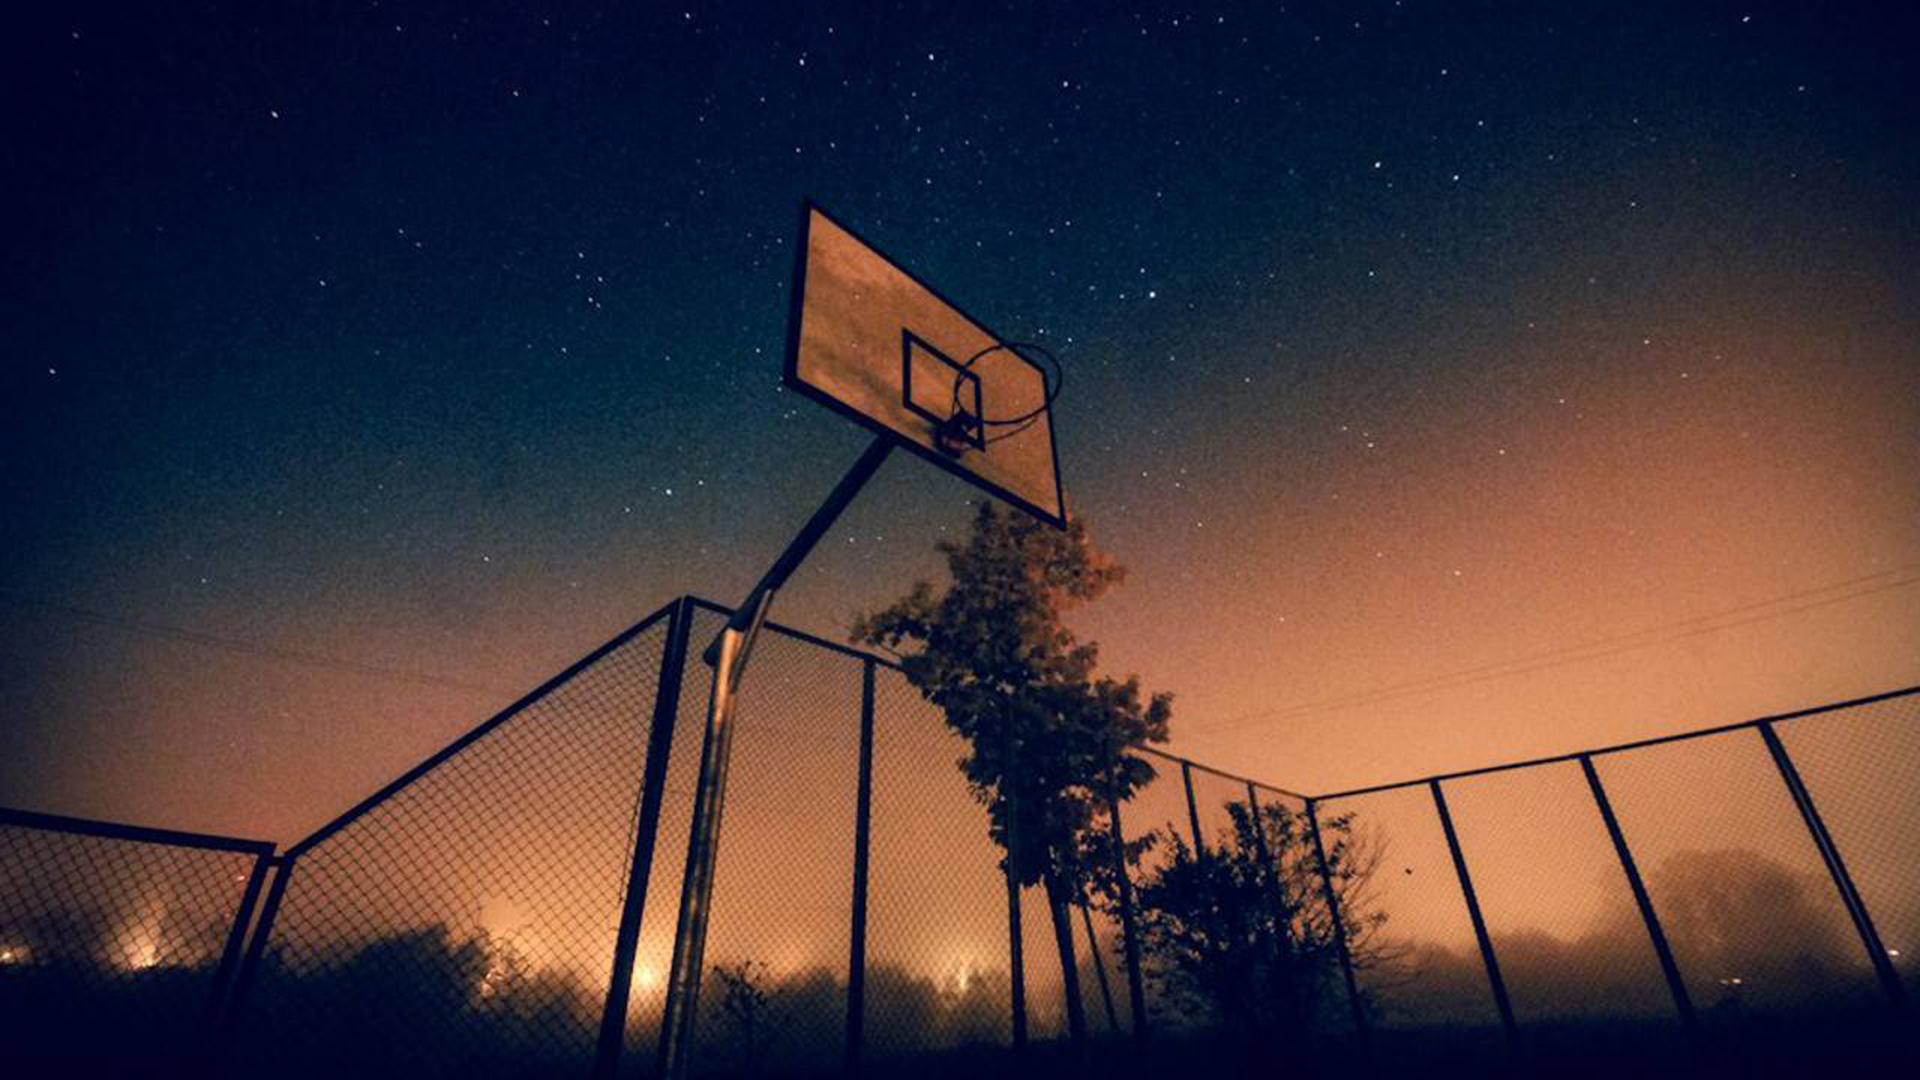 Basketball Aesthetic Wallpapers  Wallpaper Cave